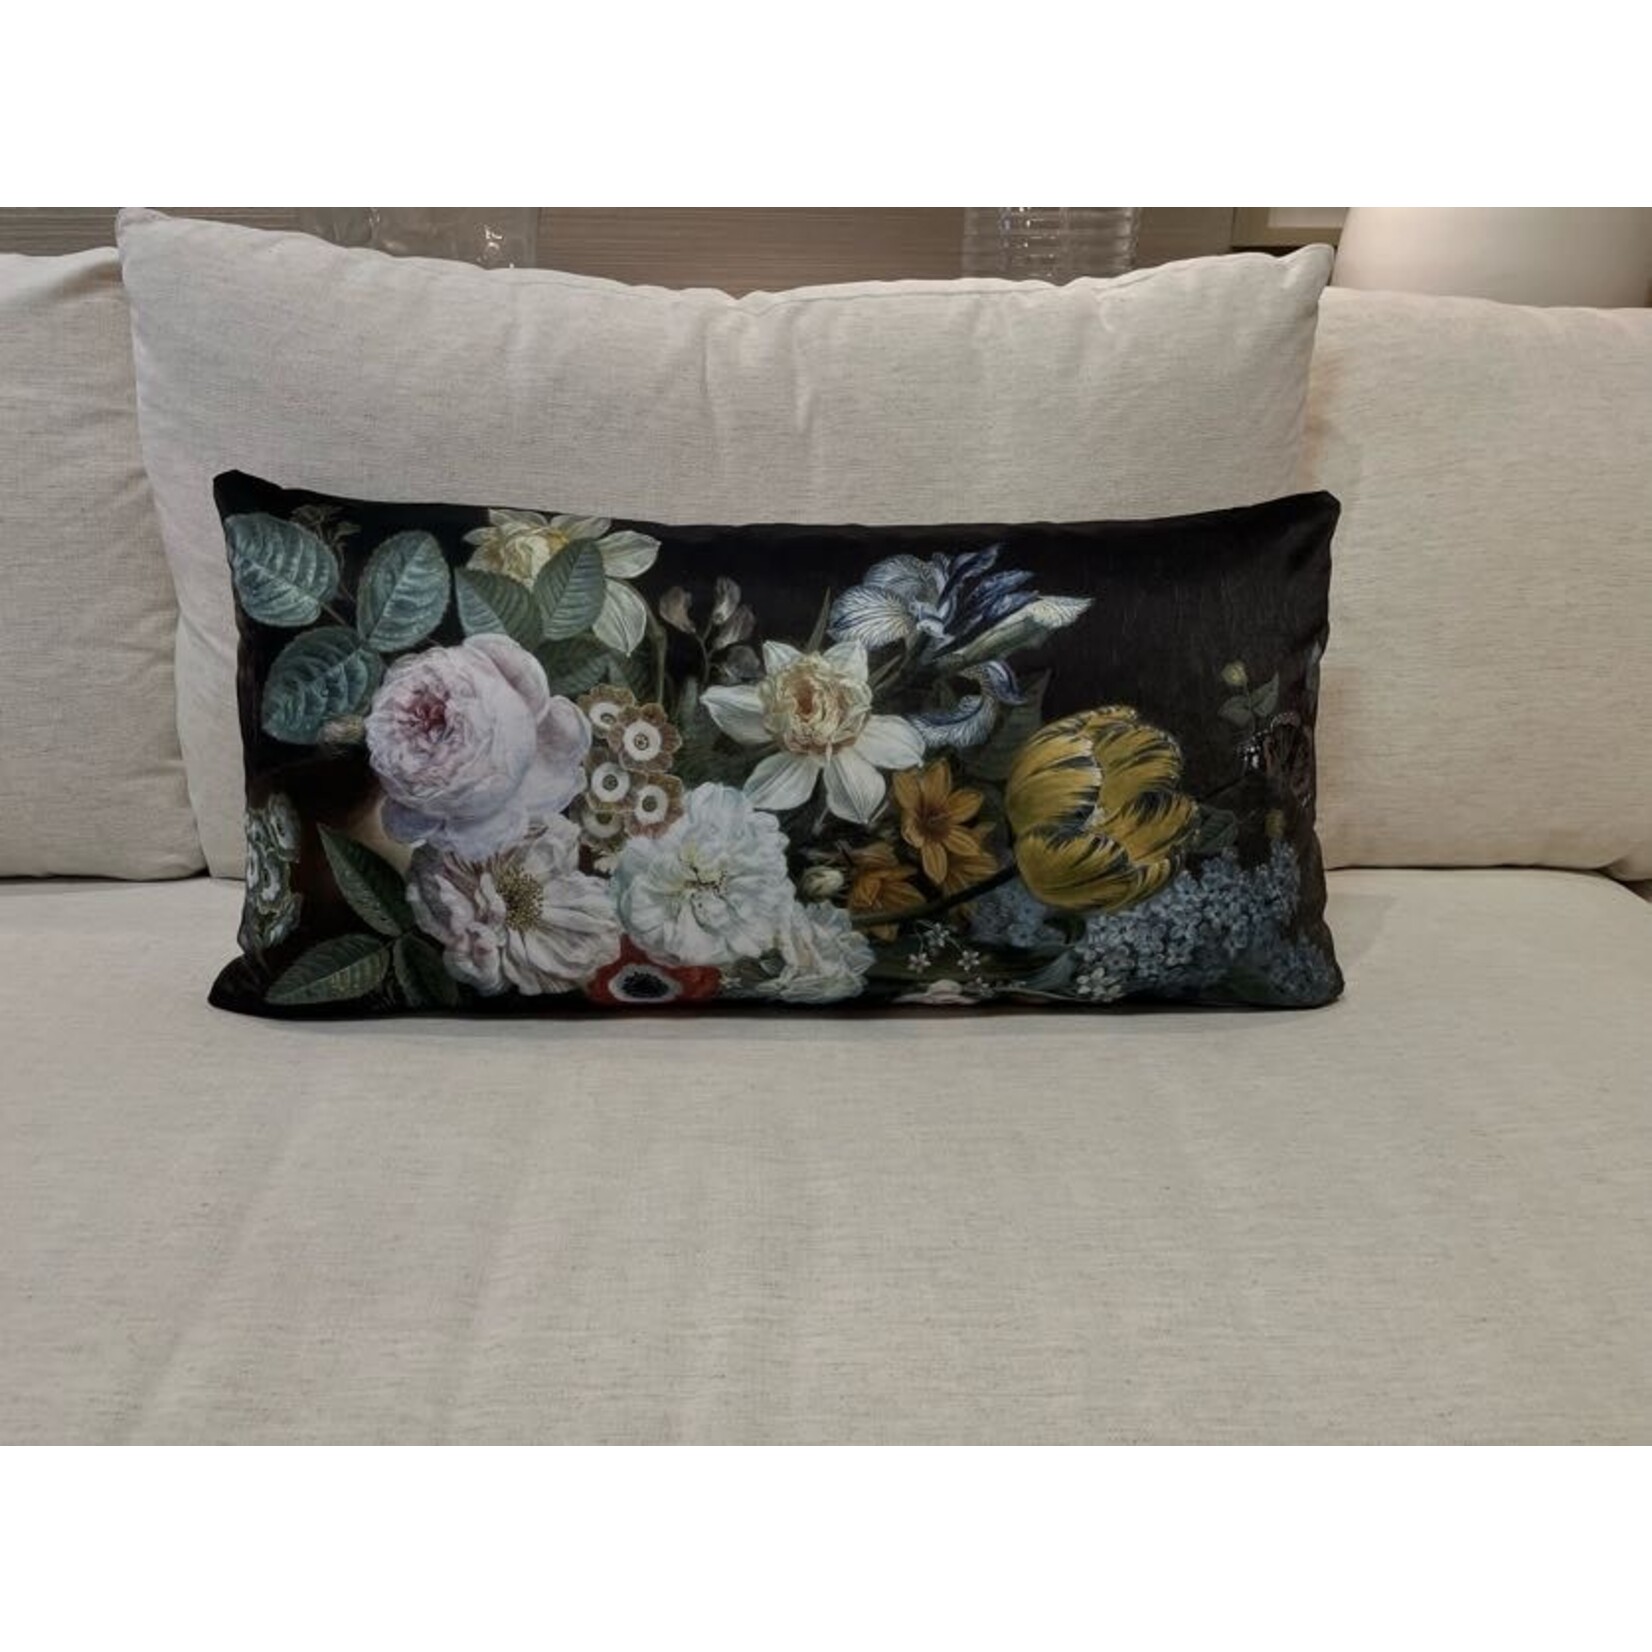 Poetic Pillow Majestic Bolster 30x15